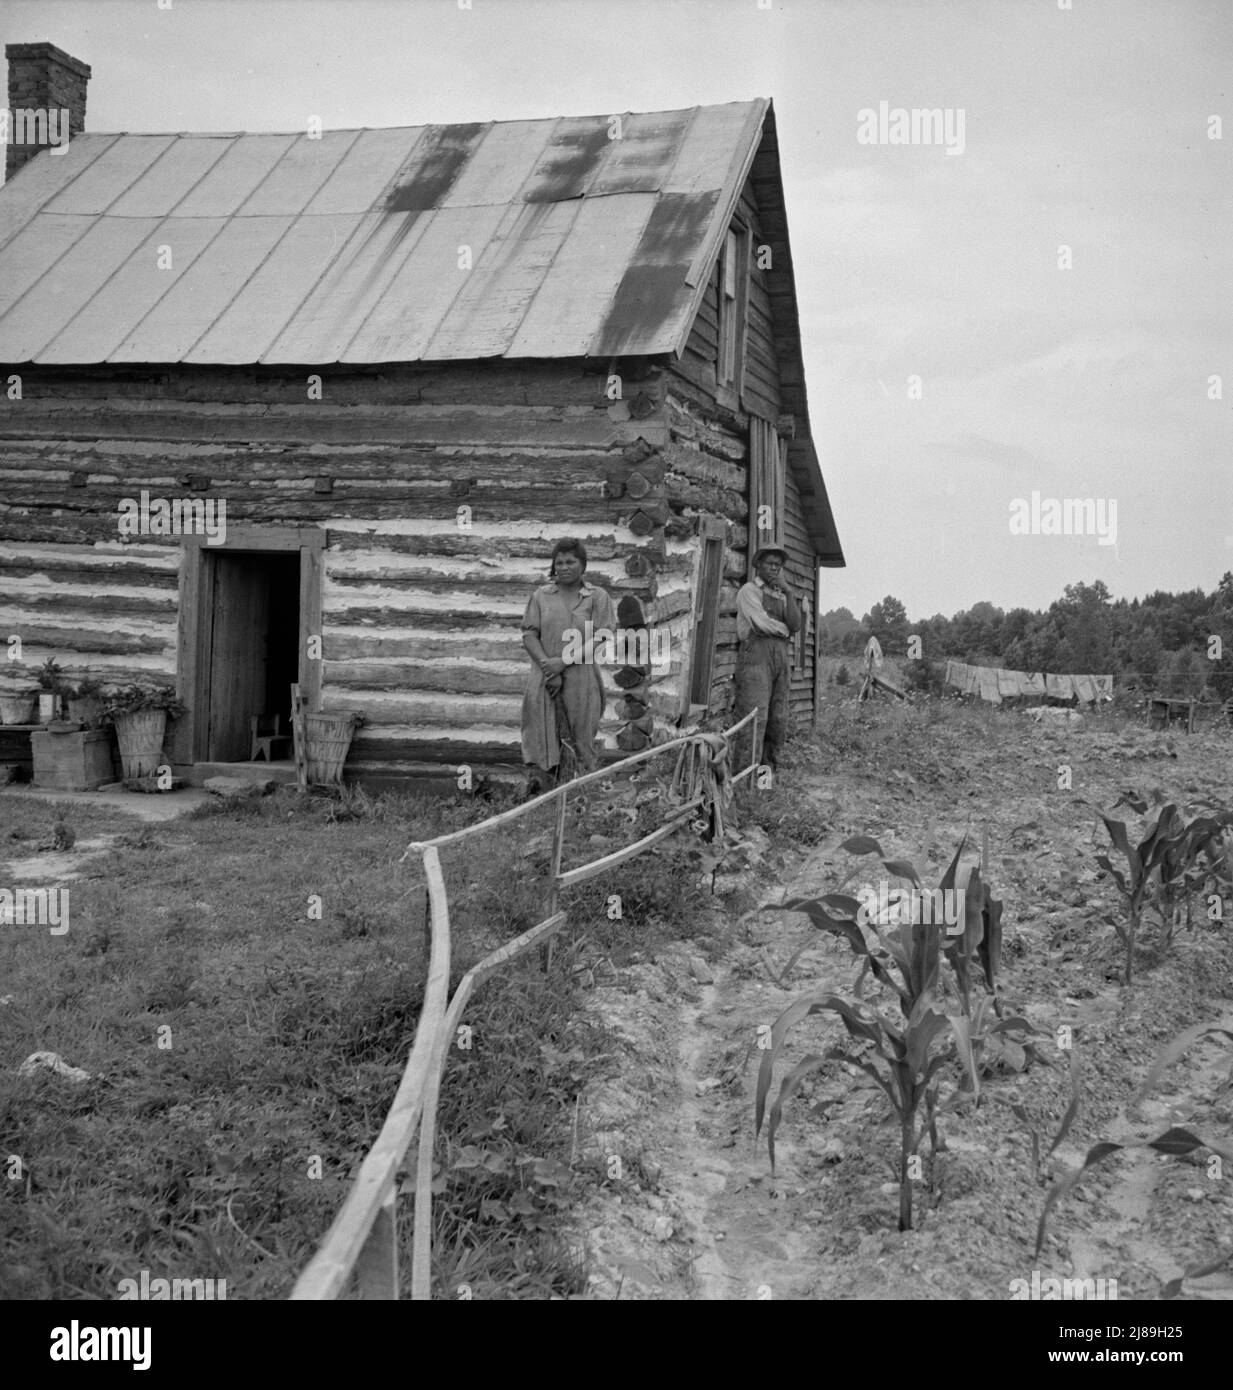 Home of tenant, Hillside Farm. Note lathe fence to protect flowers in yard. They have no privy and haul water. Sacks hanging on line are used to haul tobacco to market. Person County, North Carolina. Stock Photo